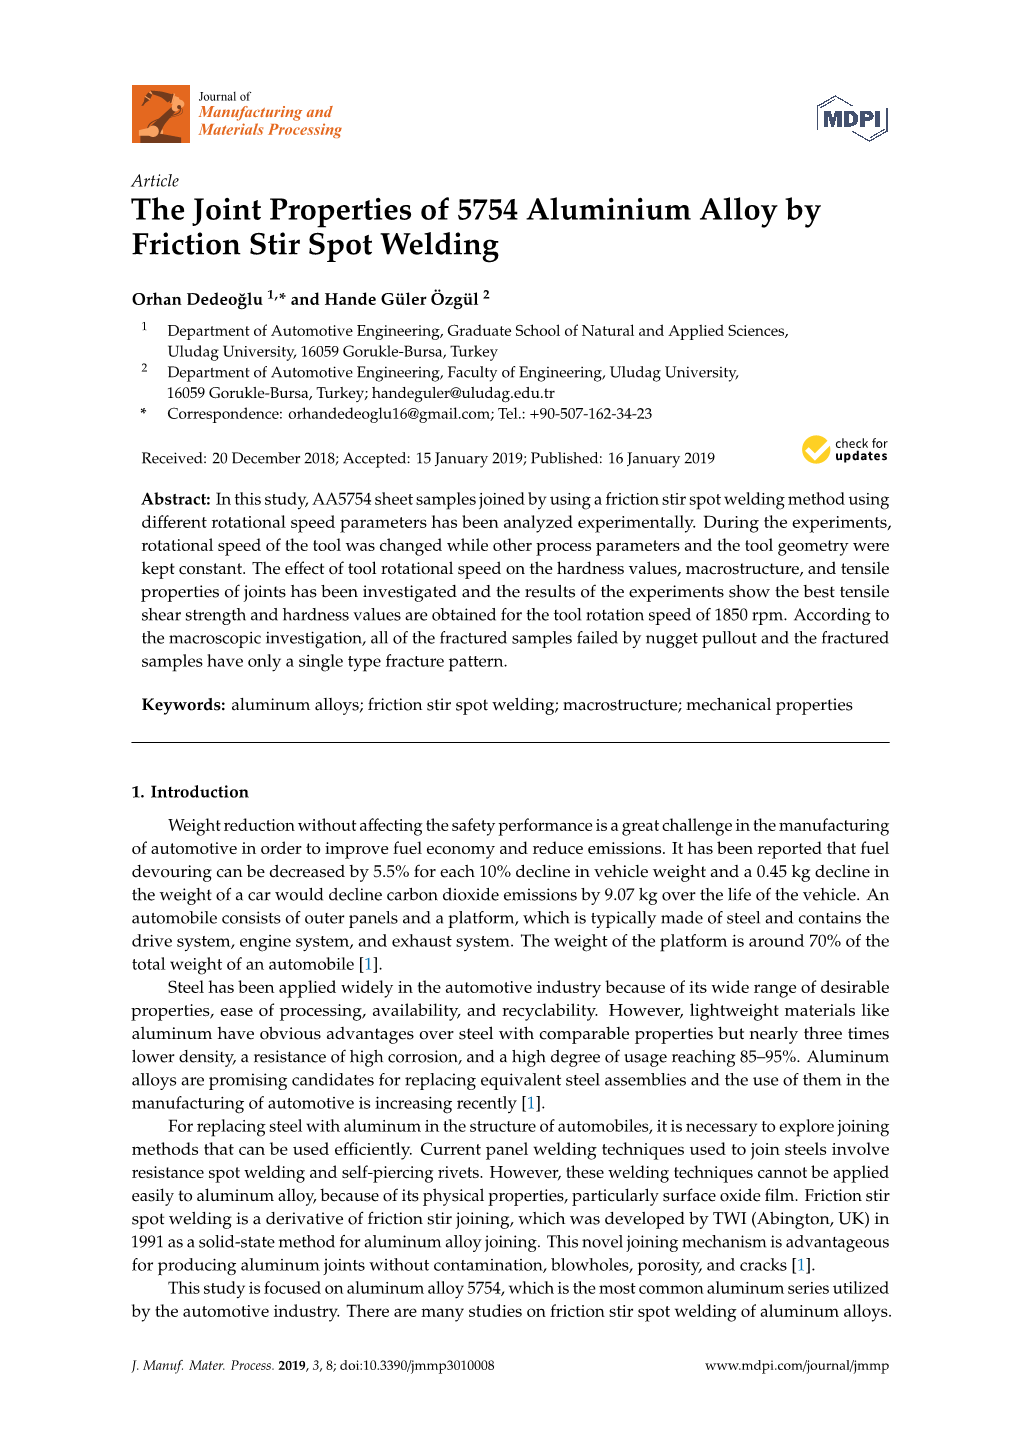 The Joint Properties of 5754 Aluminium Alloy by Friction Stir Spot Welding